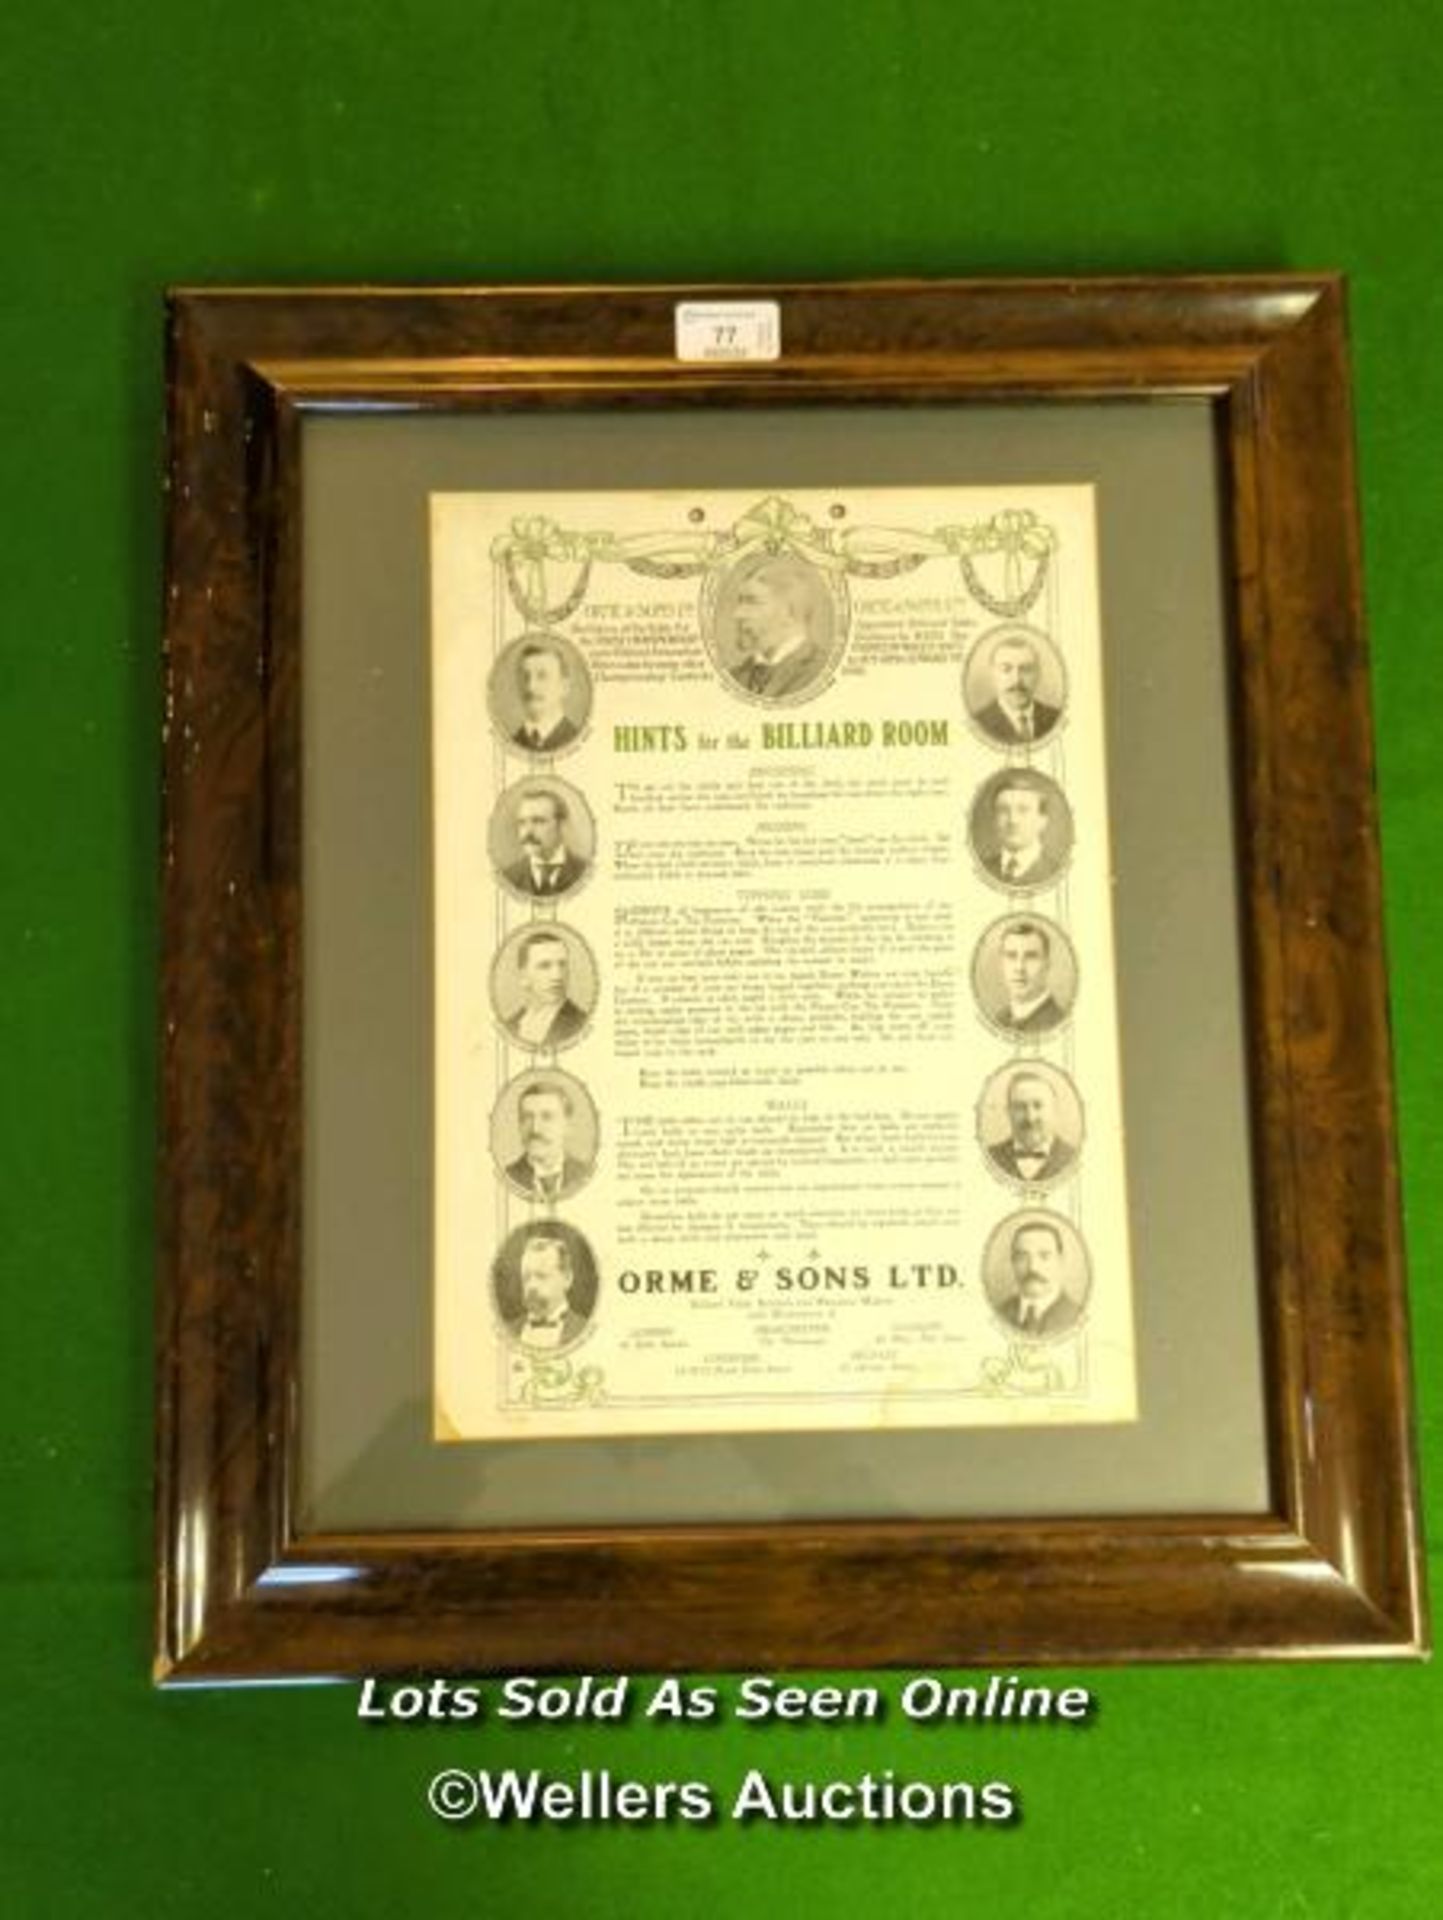 FRAMED AND GLAZED 'HINTS FOR THE BILLIARD ROOM' ORME & SONS LTD / 44CM (W) X 50.5CM (H) [THIS LOT